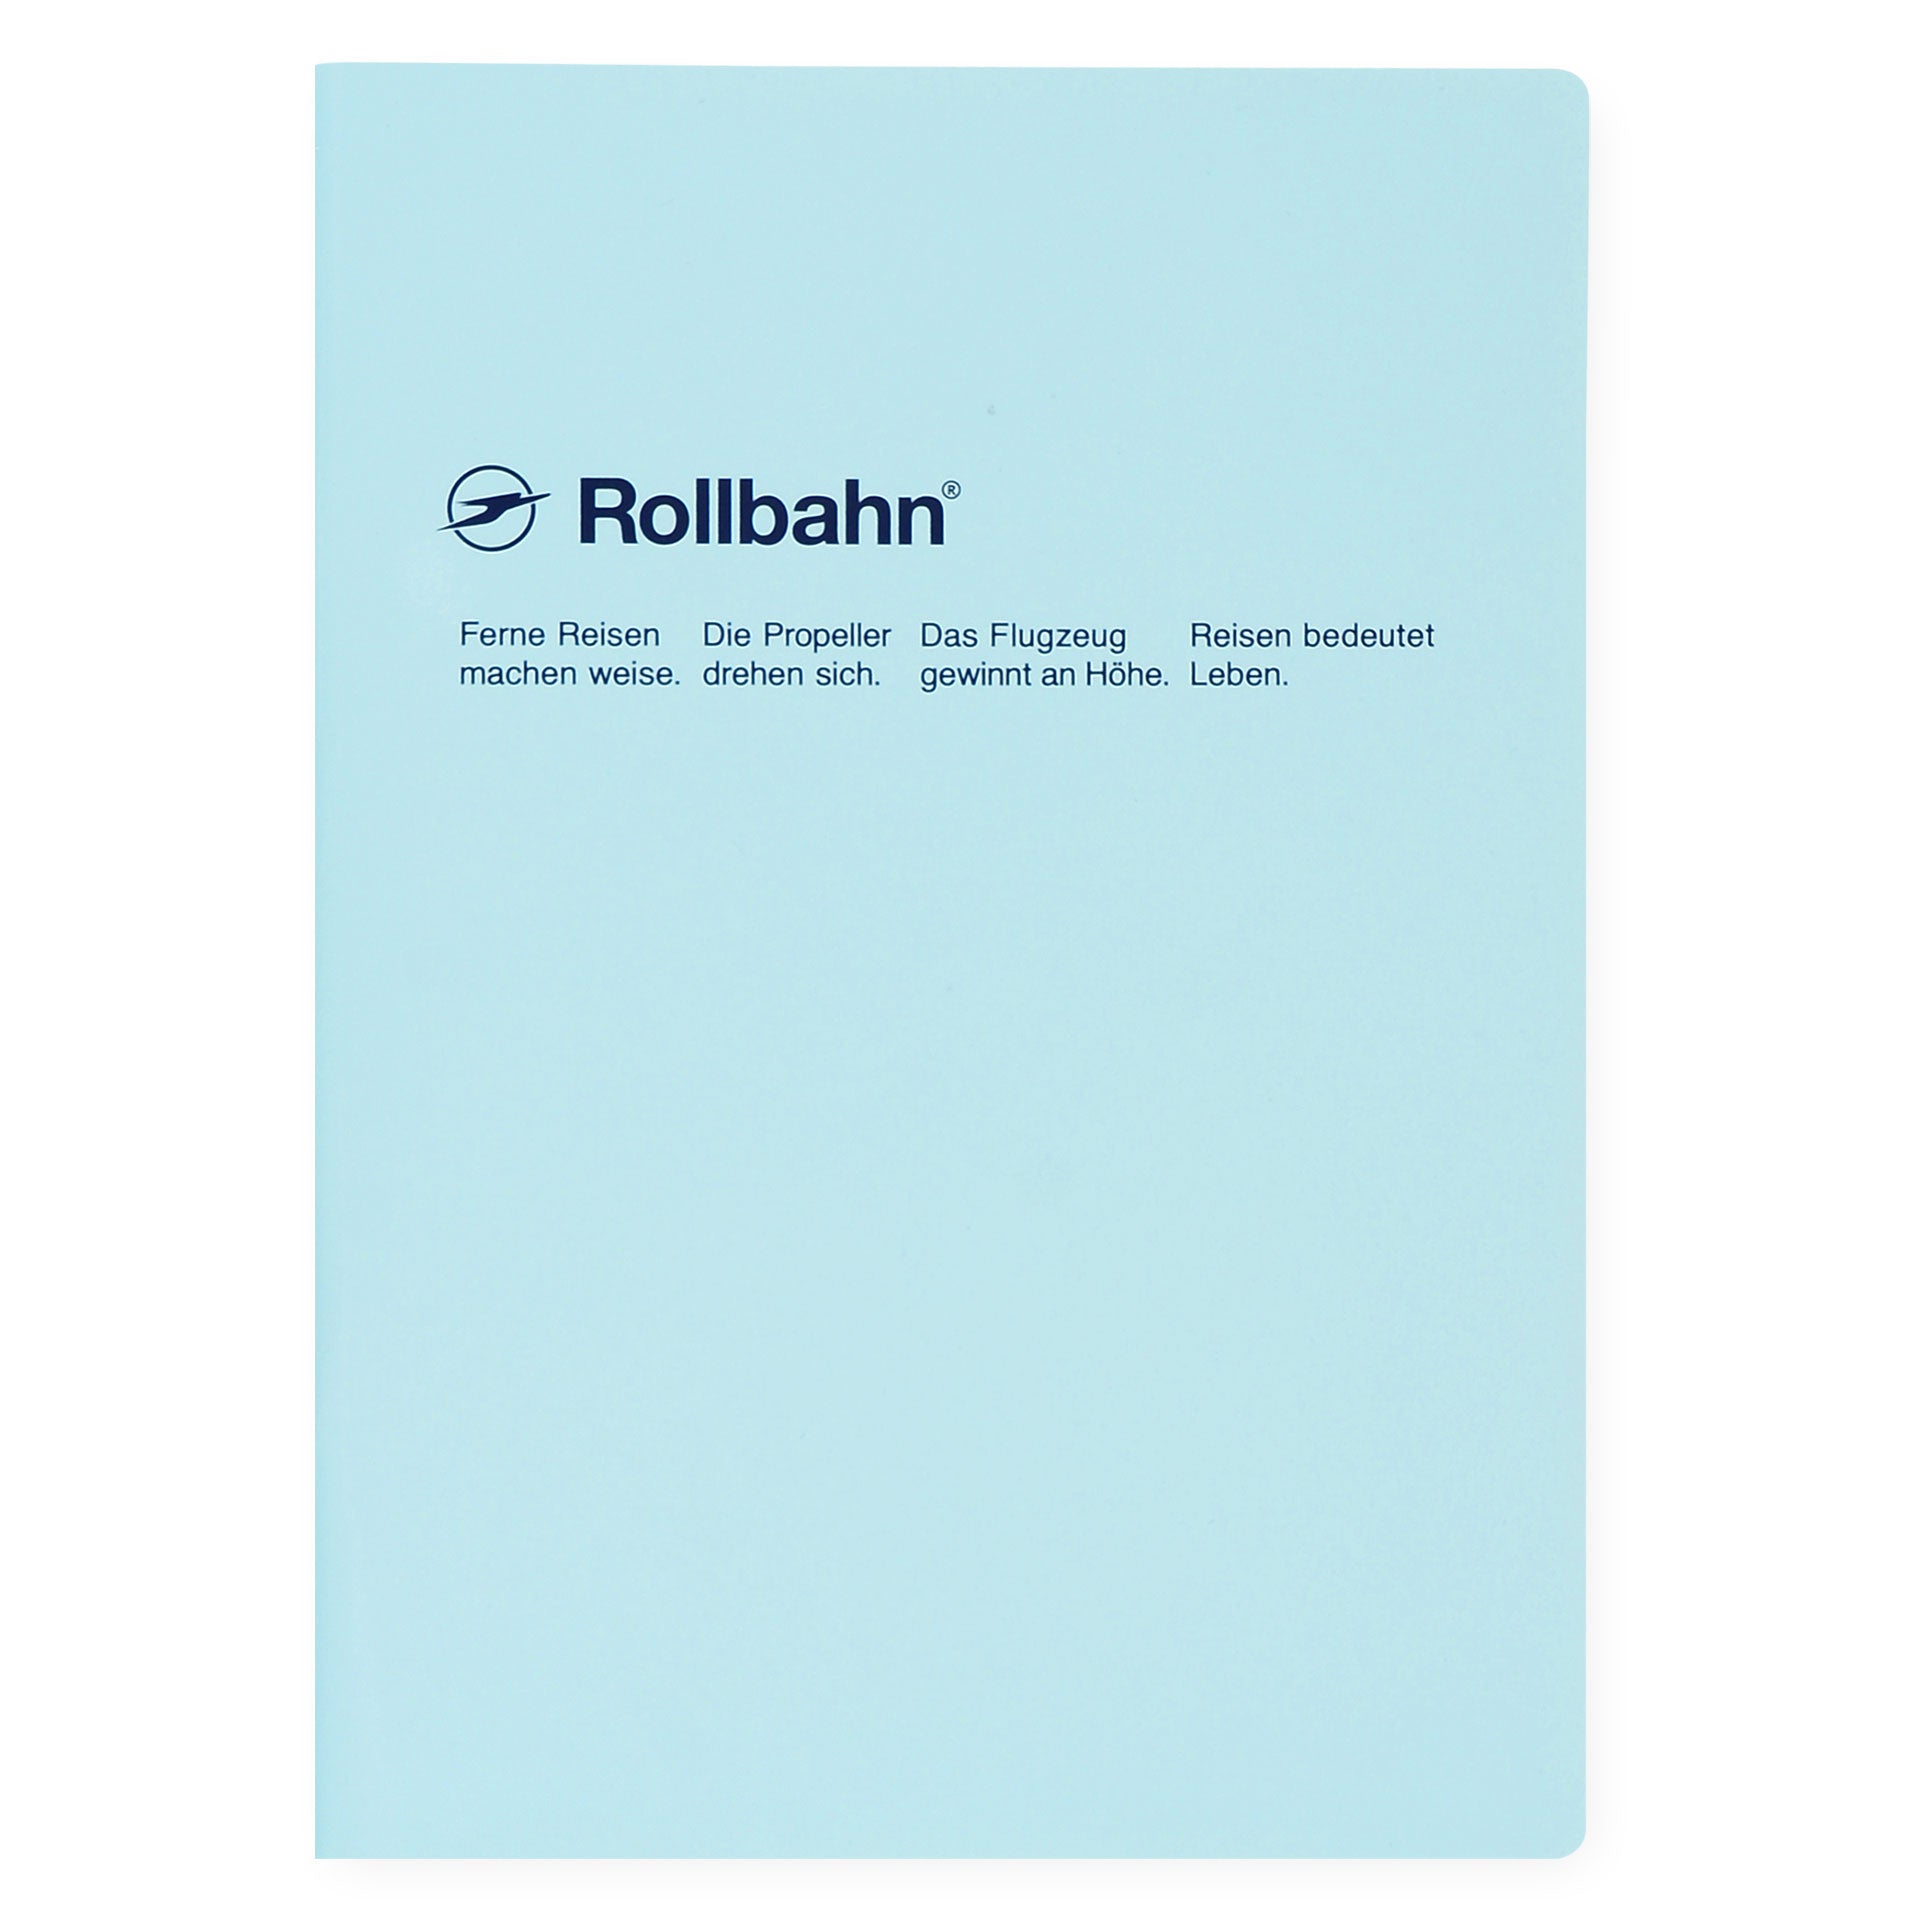 Delfonics Rollbahn "Note" Notebook Pocket, Large, A5 Or Extra Large  | 10 Colors Light Blue / Pocket A6 ( 4 x 6")